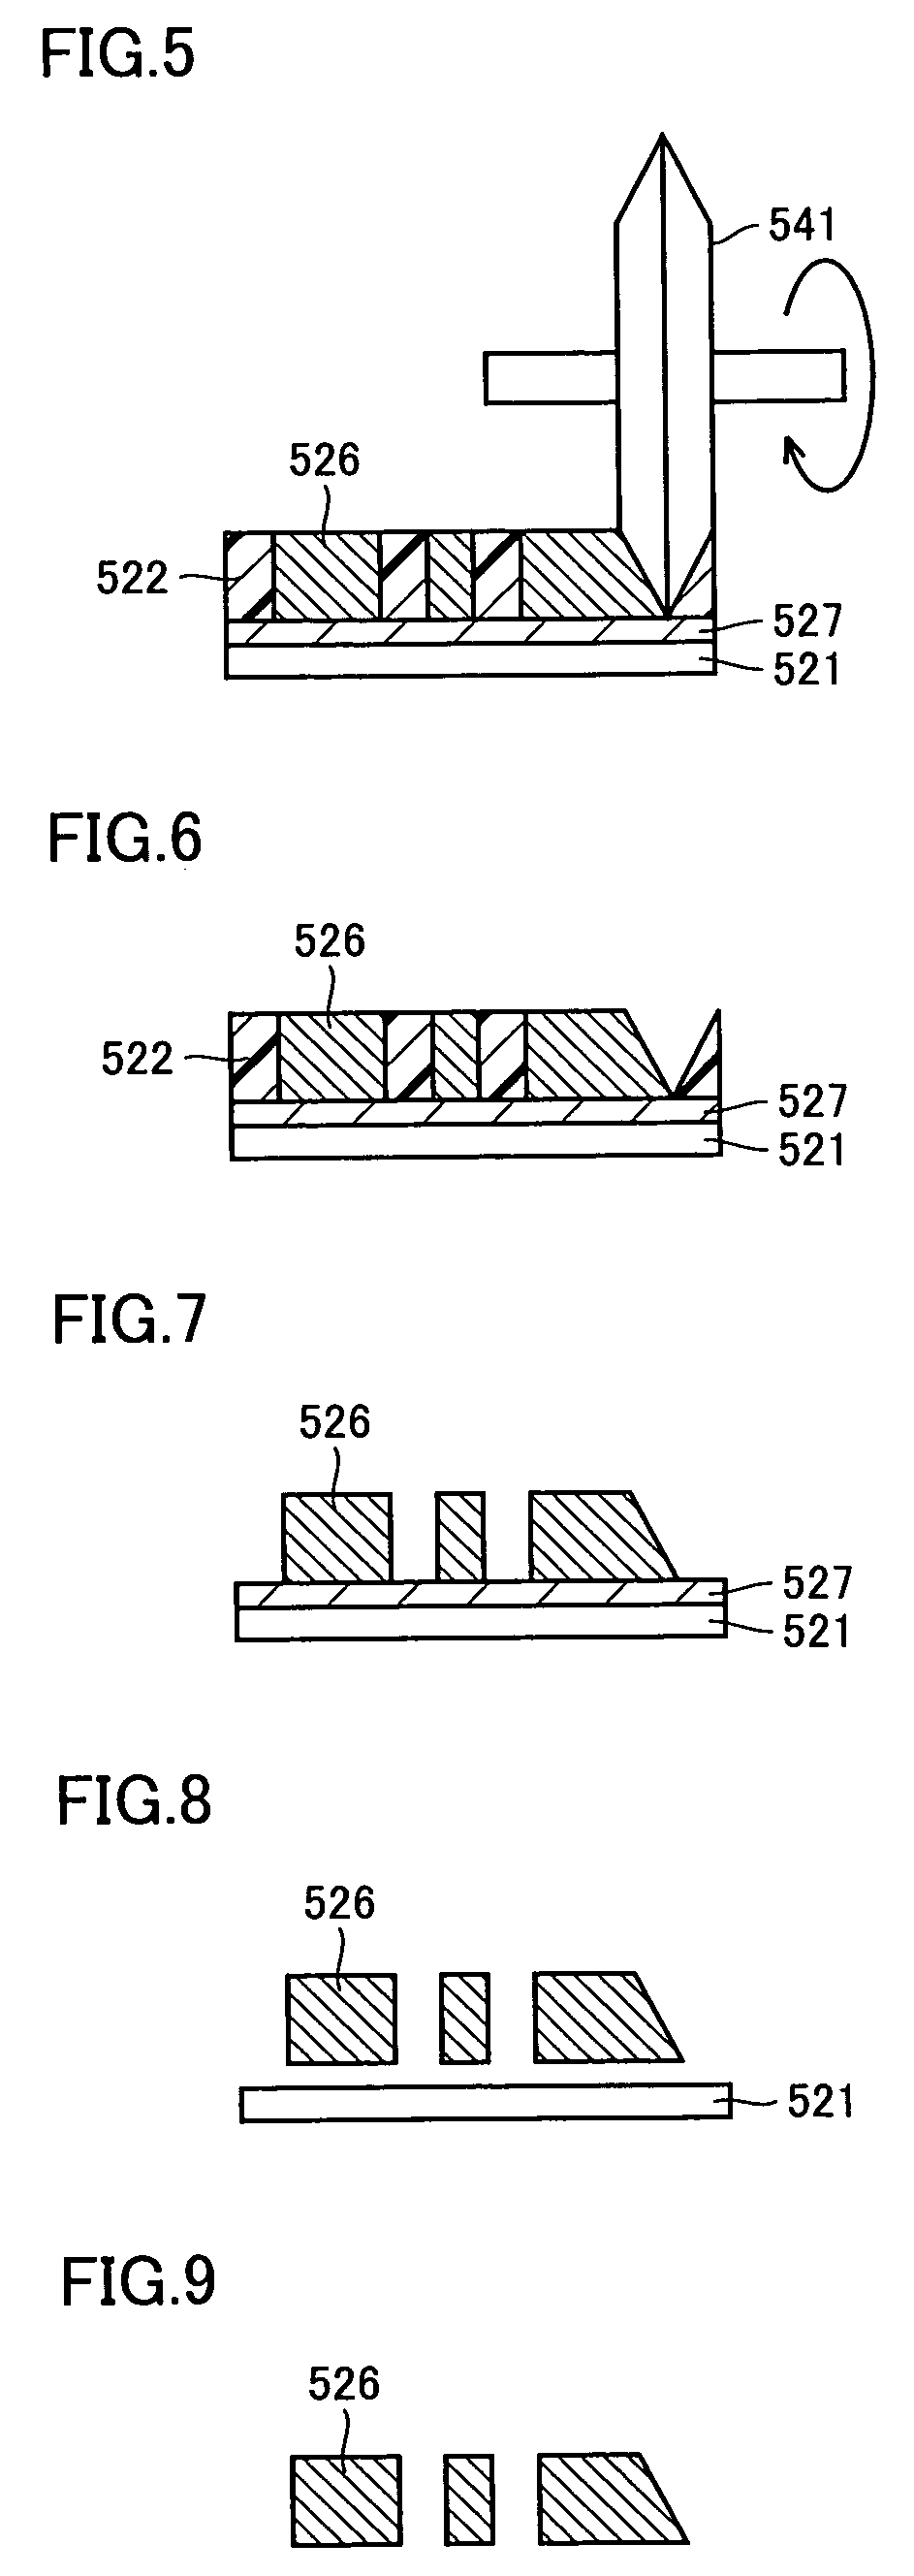 Contact probe, method of manufacturing the contact probe, and device and method for inspection